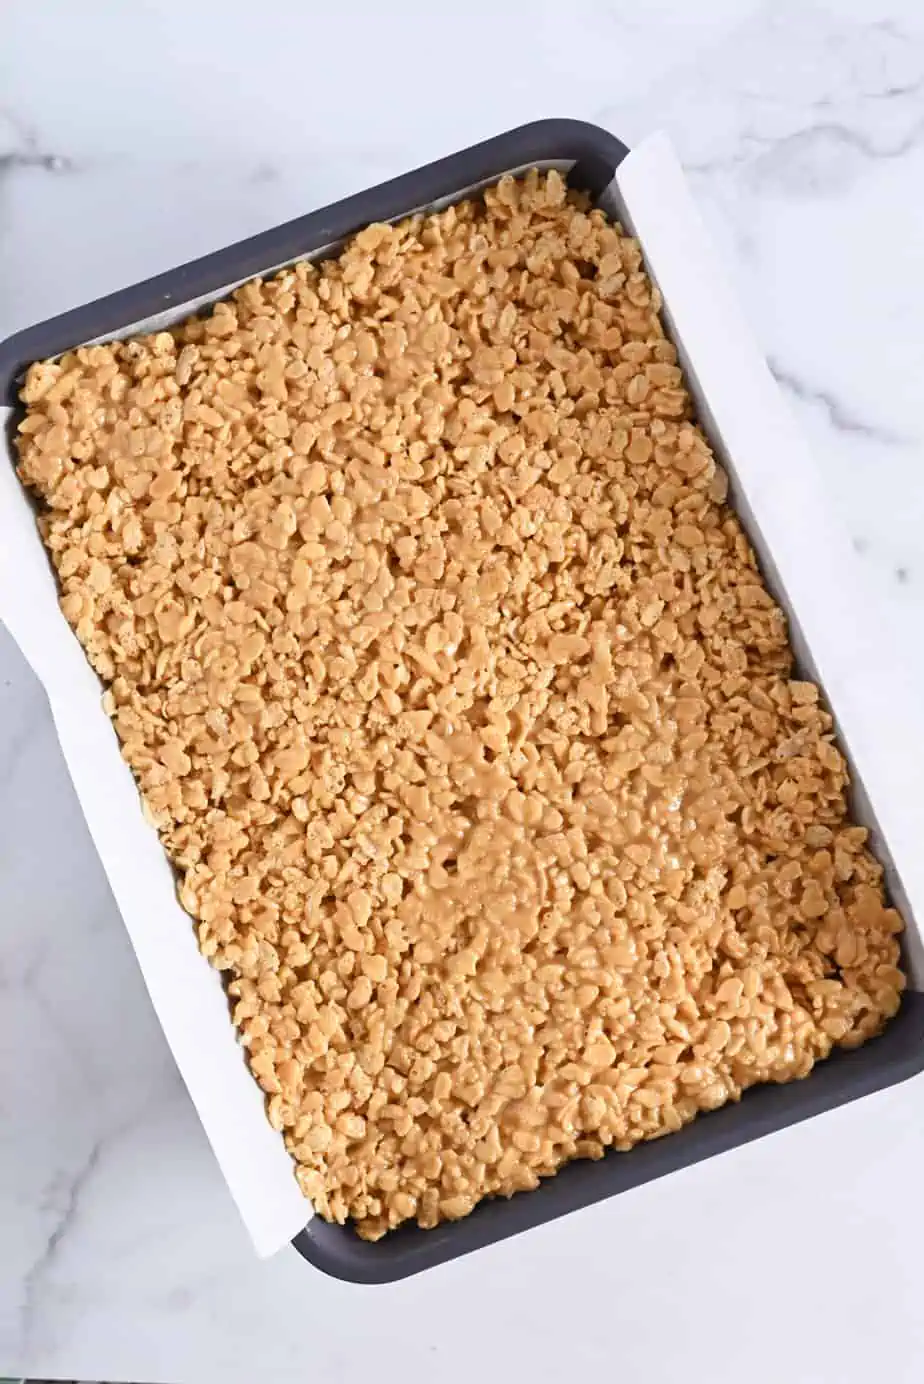 Peanut butter rice krispie bars pressed into a parchment-lined baking pan.